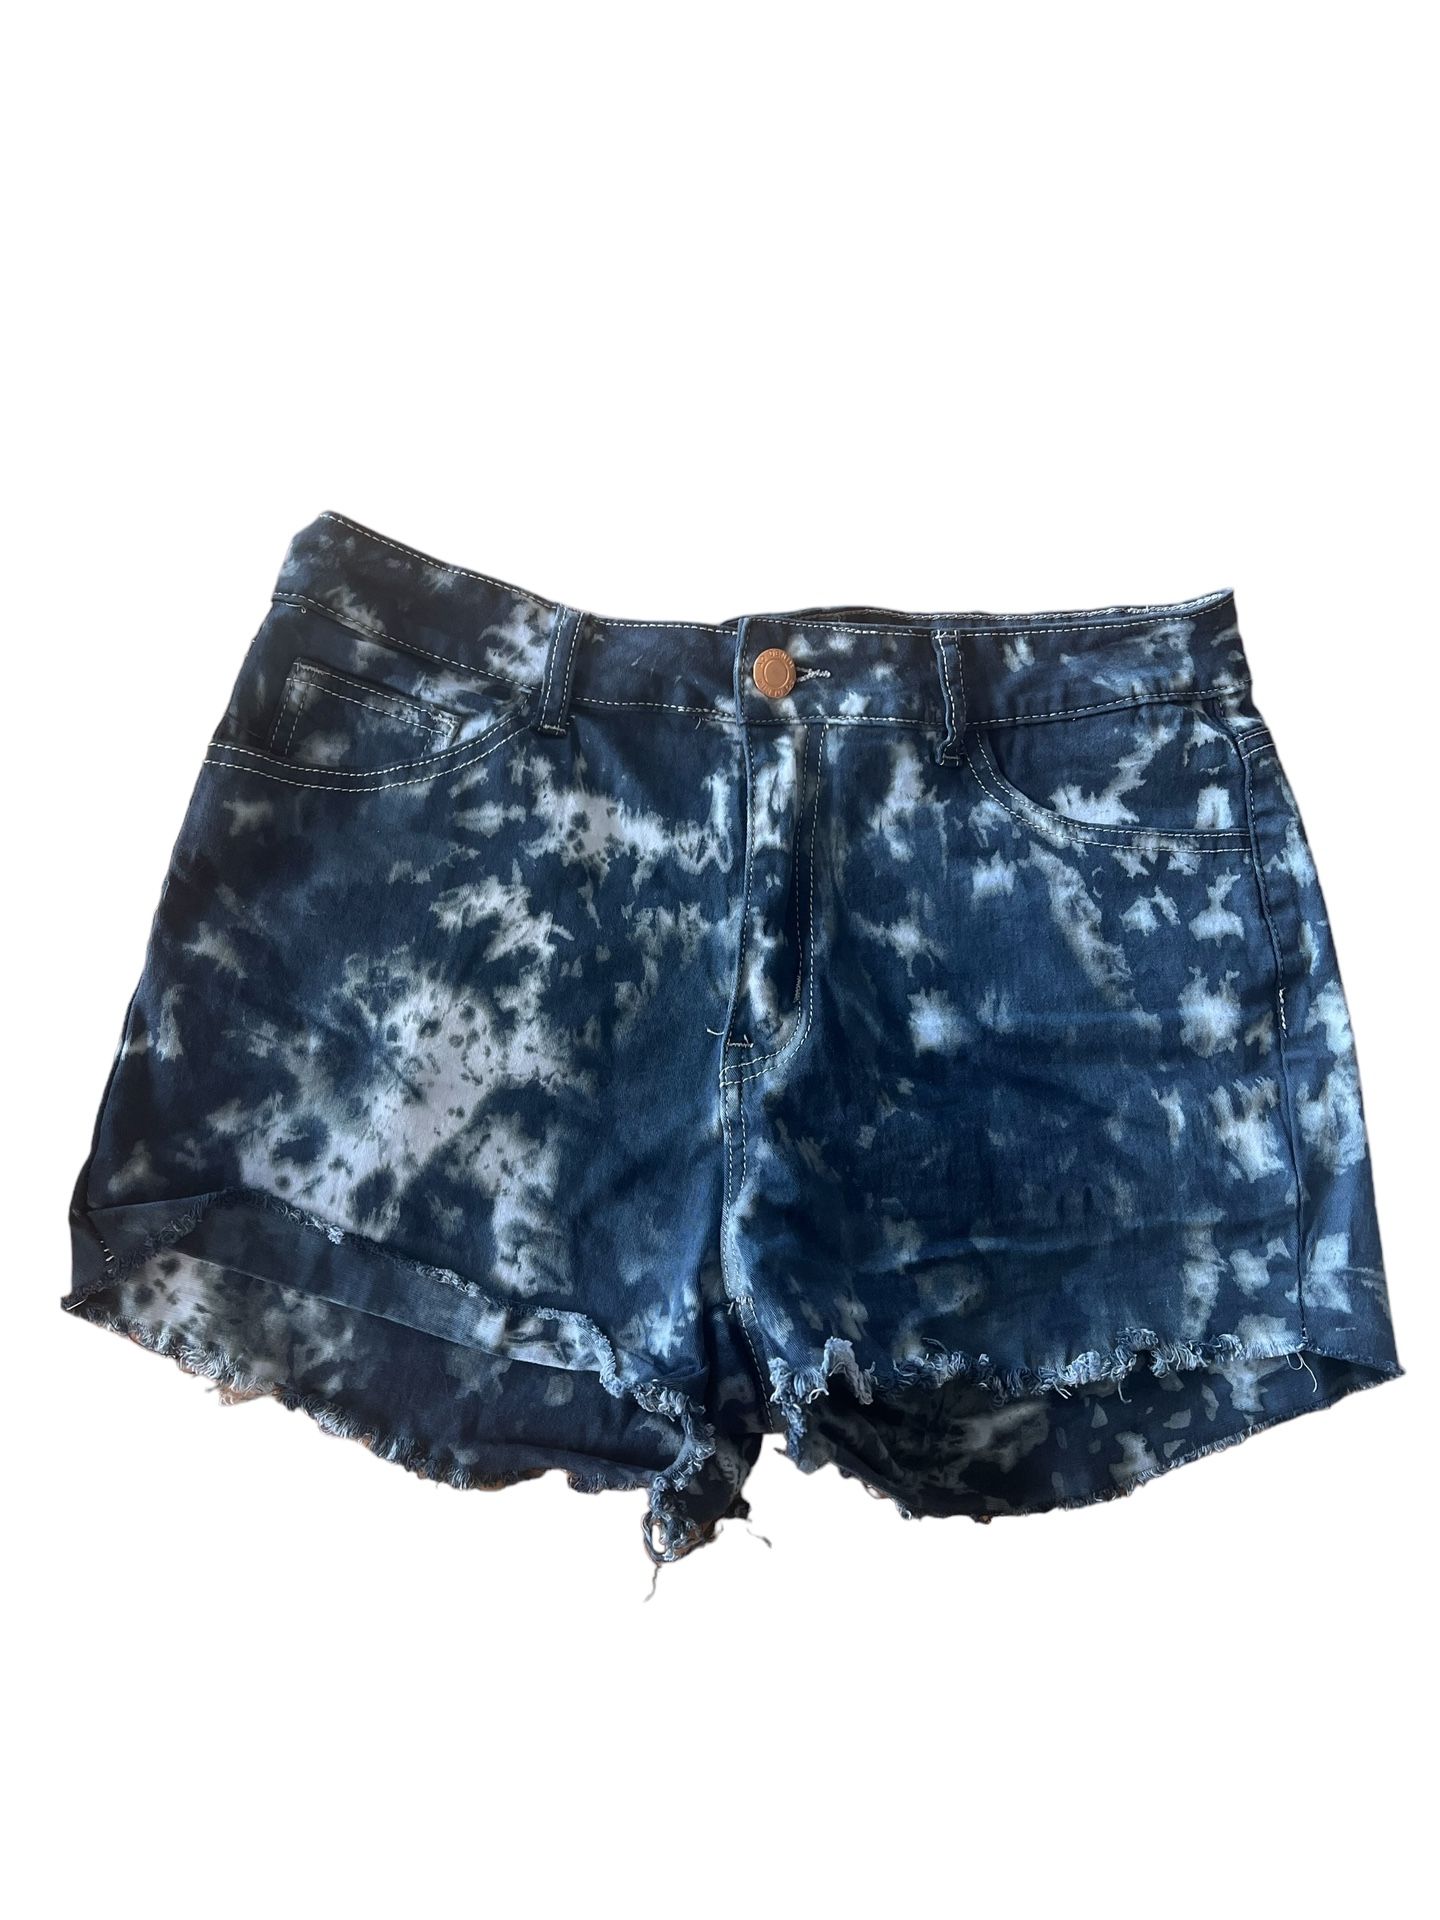 AQ Denim Tie Dye Size 14 Shorts.  Comes from a pet and smoke free household  Some fringe Good condition 2 pockets B51 